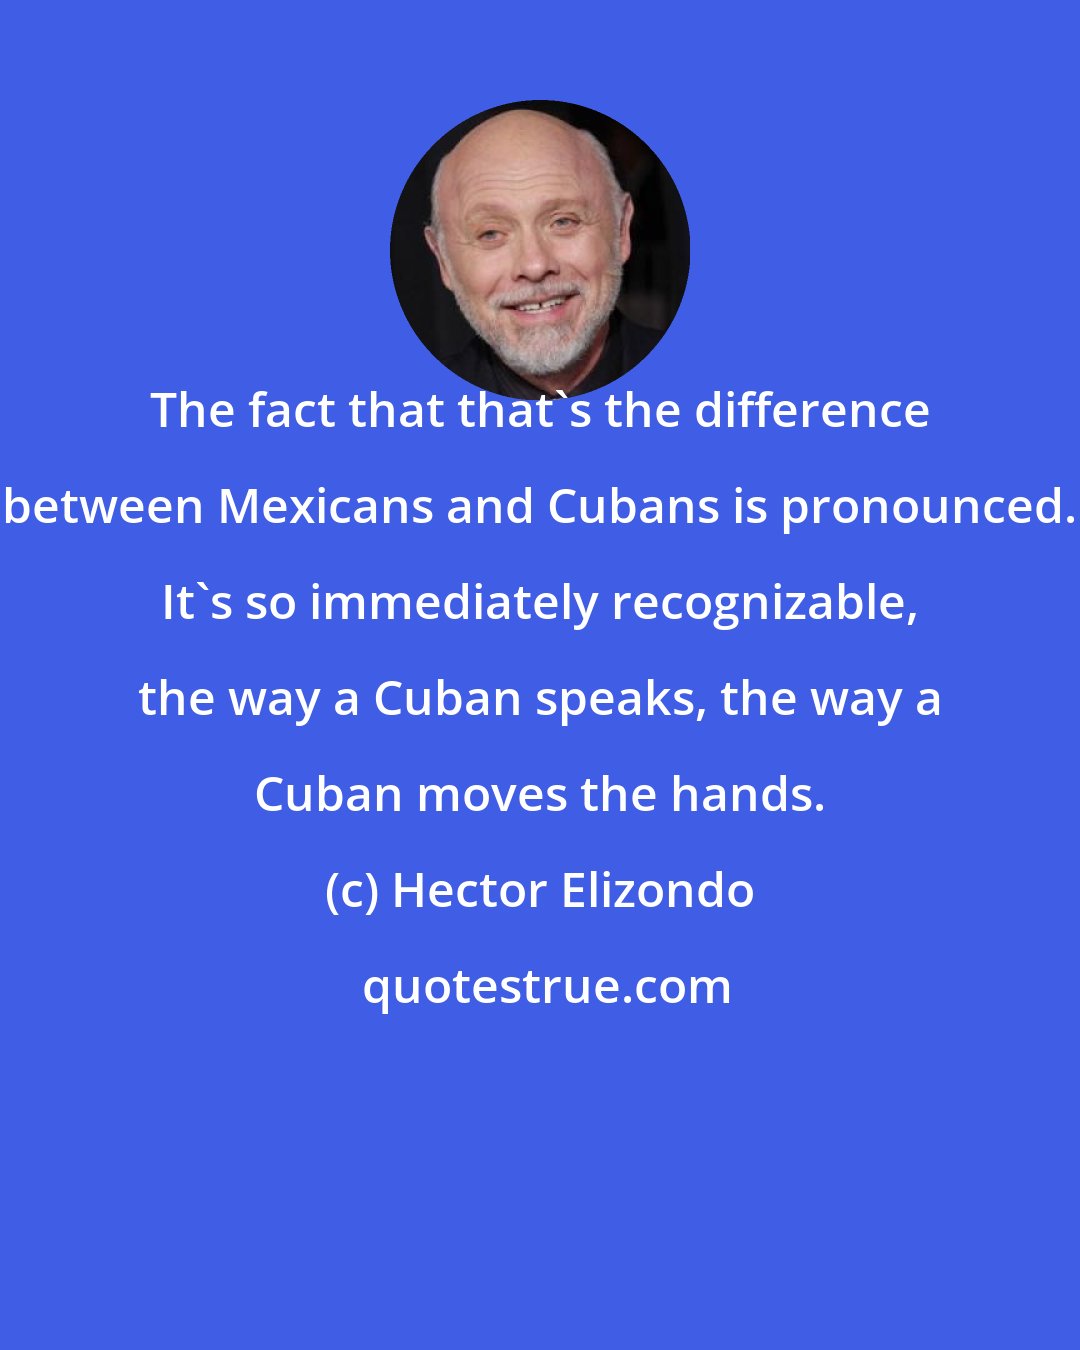 Hector Elizondo: The fact that that's the difference between Mexicans and Cubans is pronounced. It's so immediately recognizable, the way a Cuban speaks, the way a Cuban moves the hands.